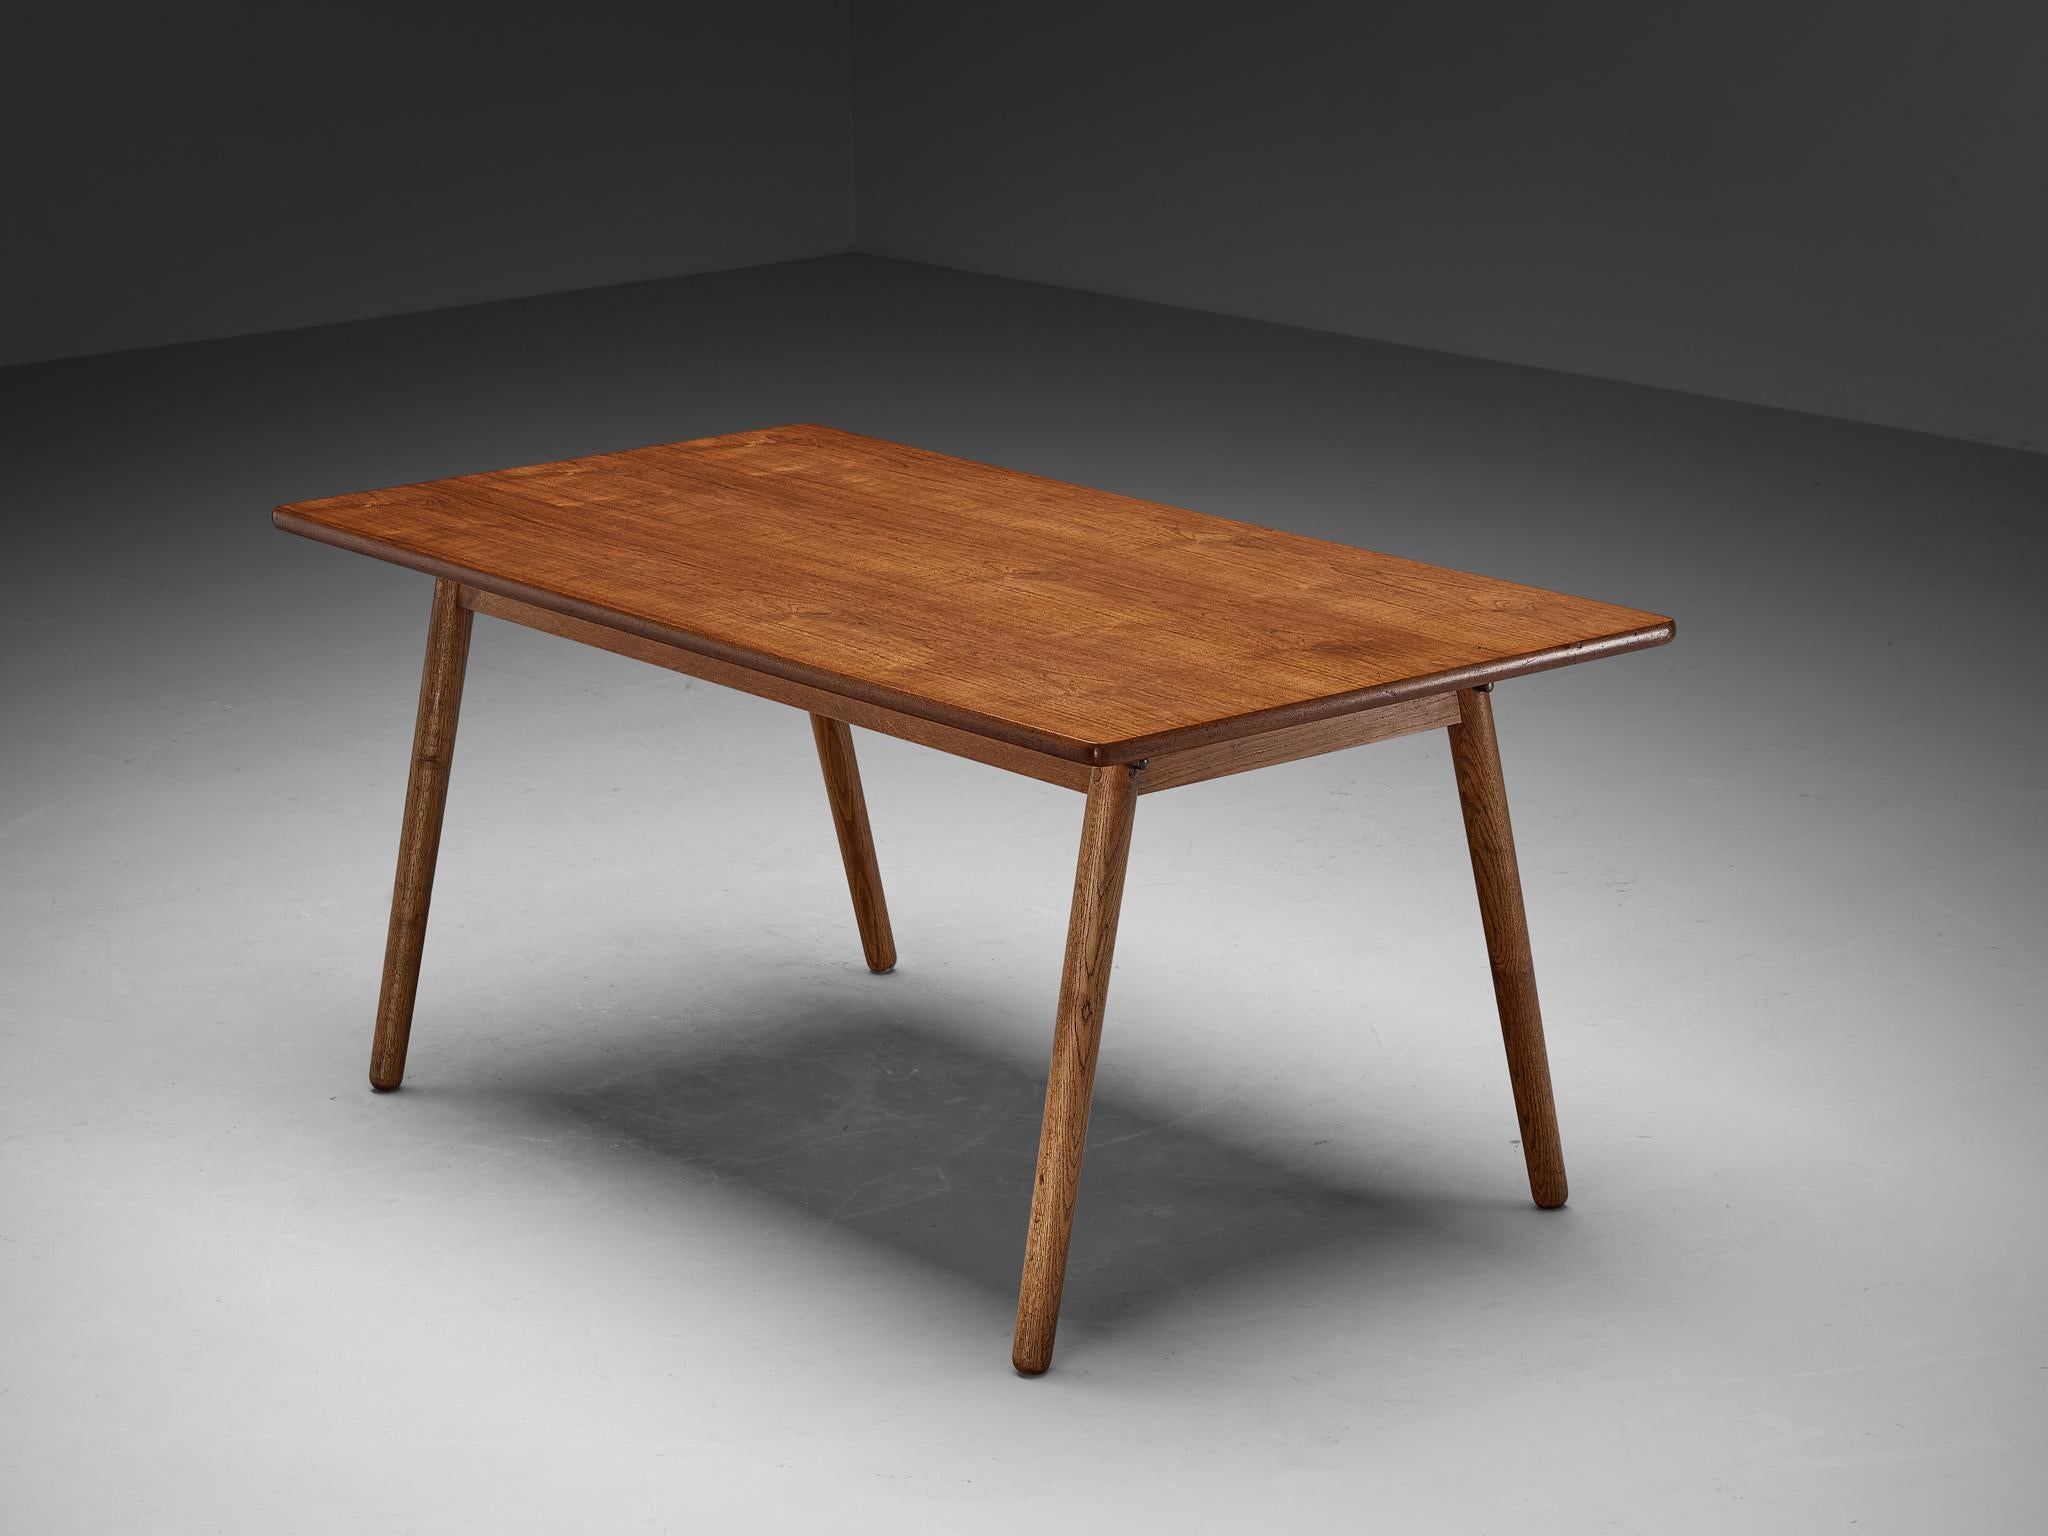 Dining table, teak, oak, pine, Europe, 1960s

Sober and modest table made in Europe in the 1960s. This piece shows beautiful grain in different wood types, a simplistic and functional character. The angled legs create elegance within the design of